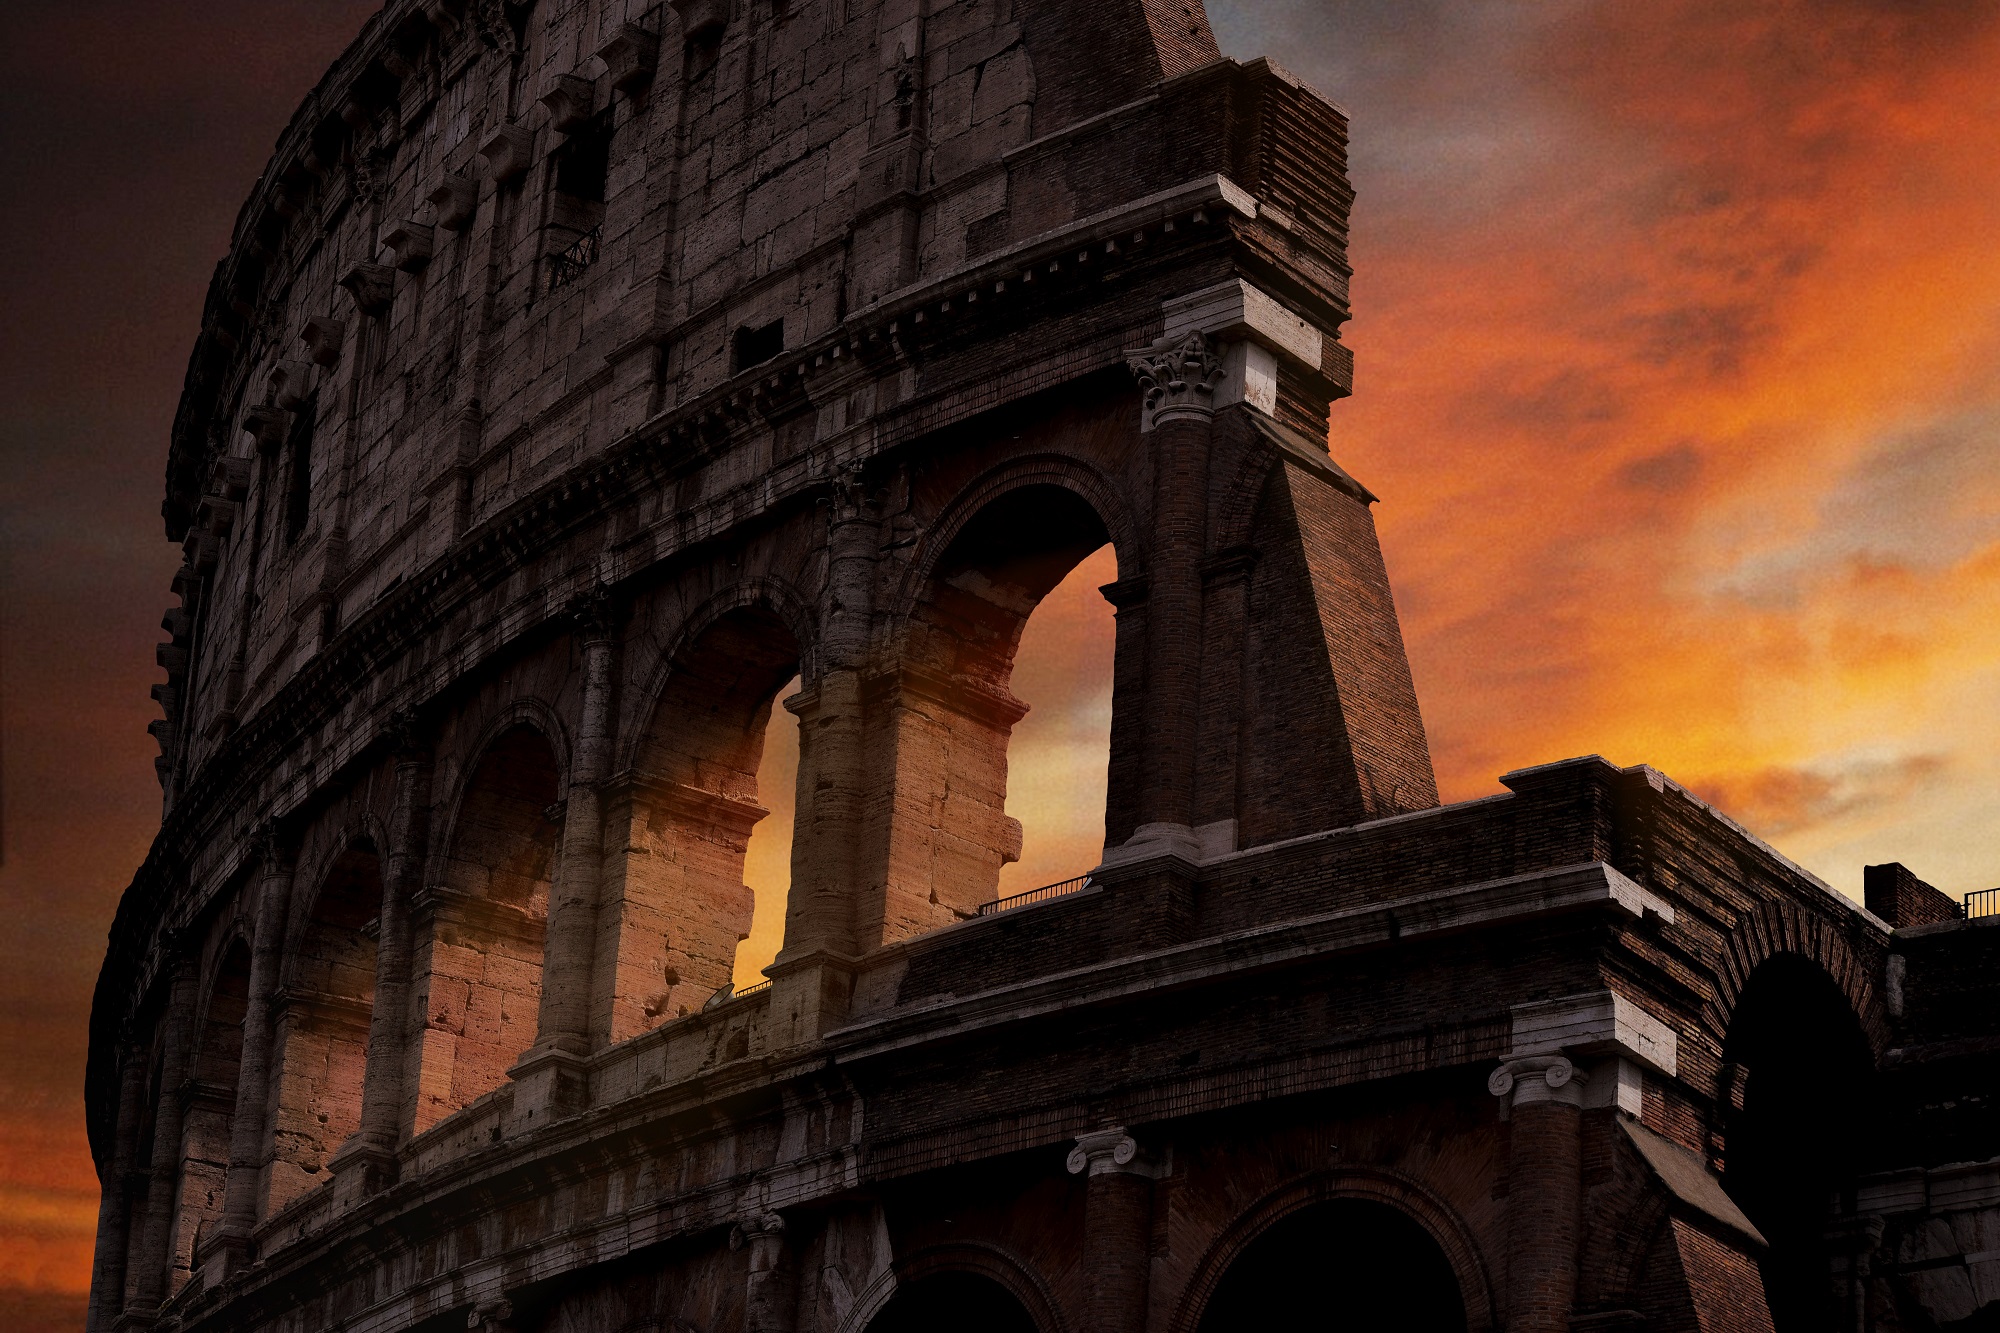 Why is the Colosseum broken?